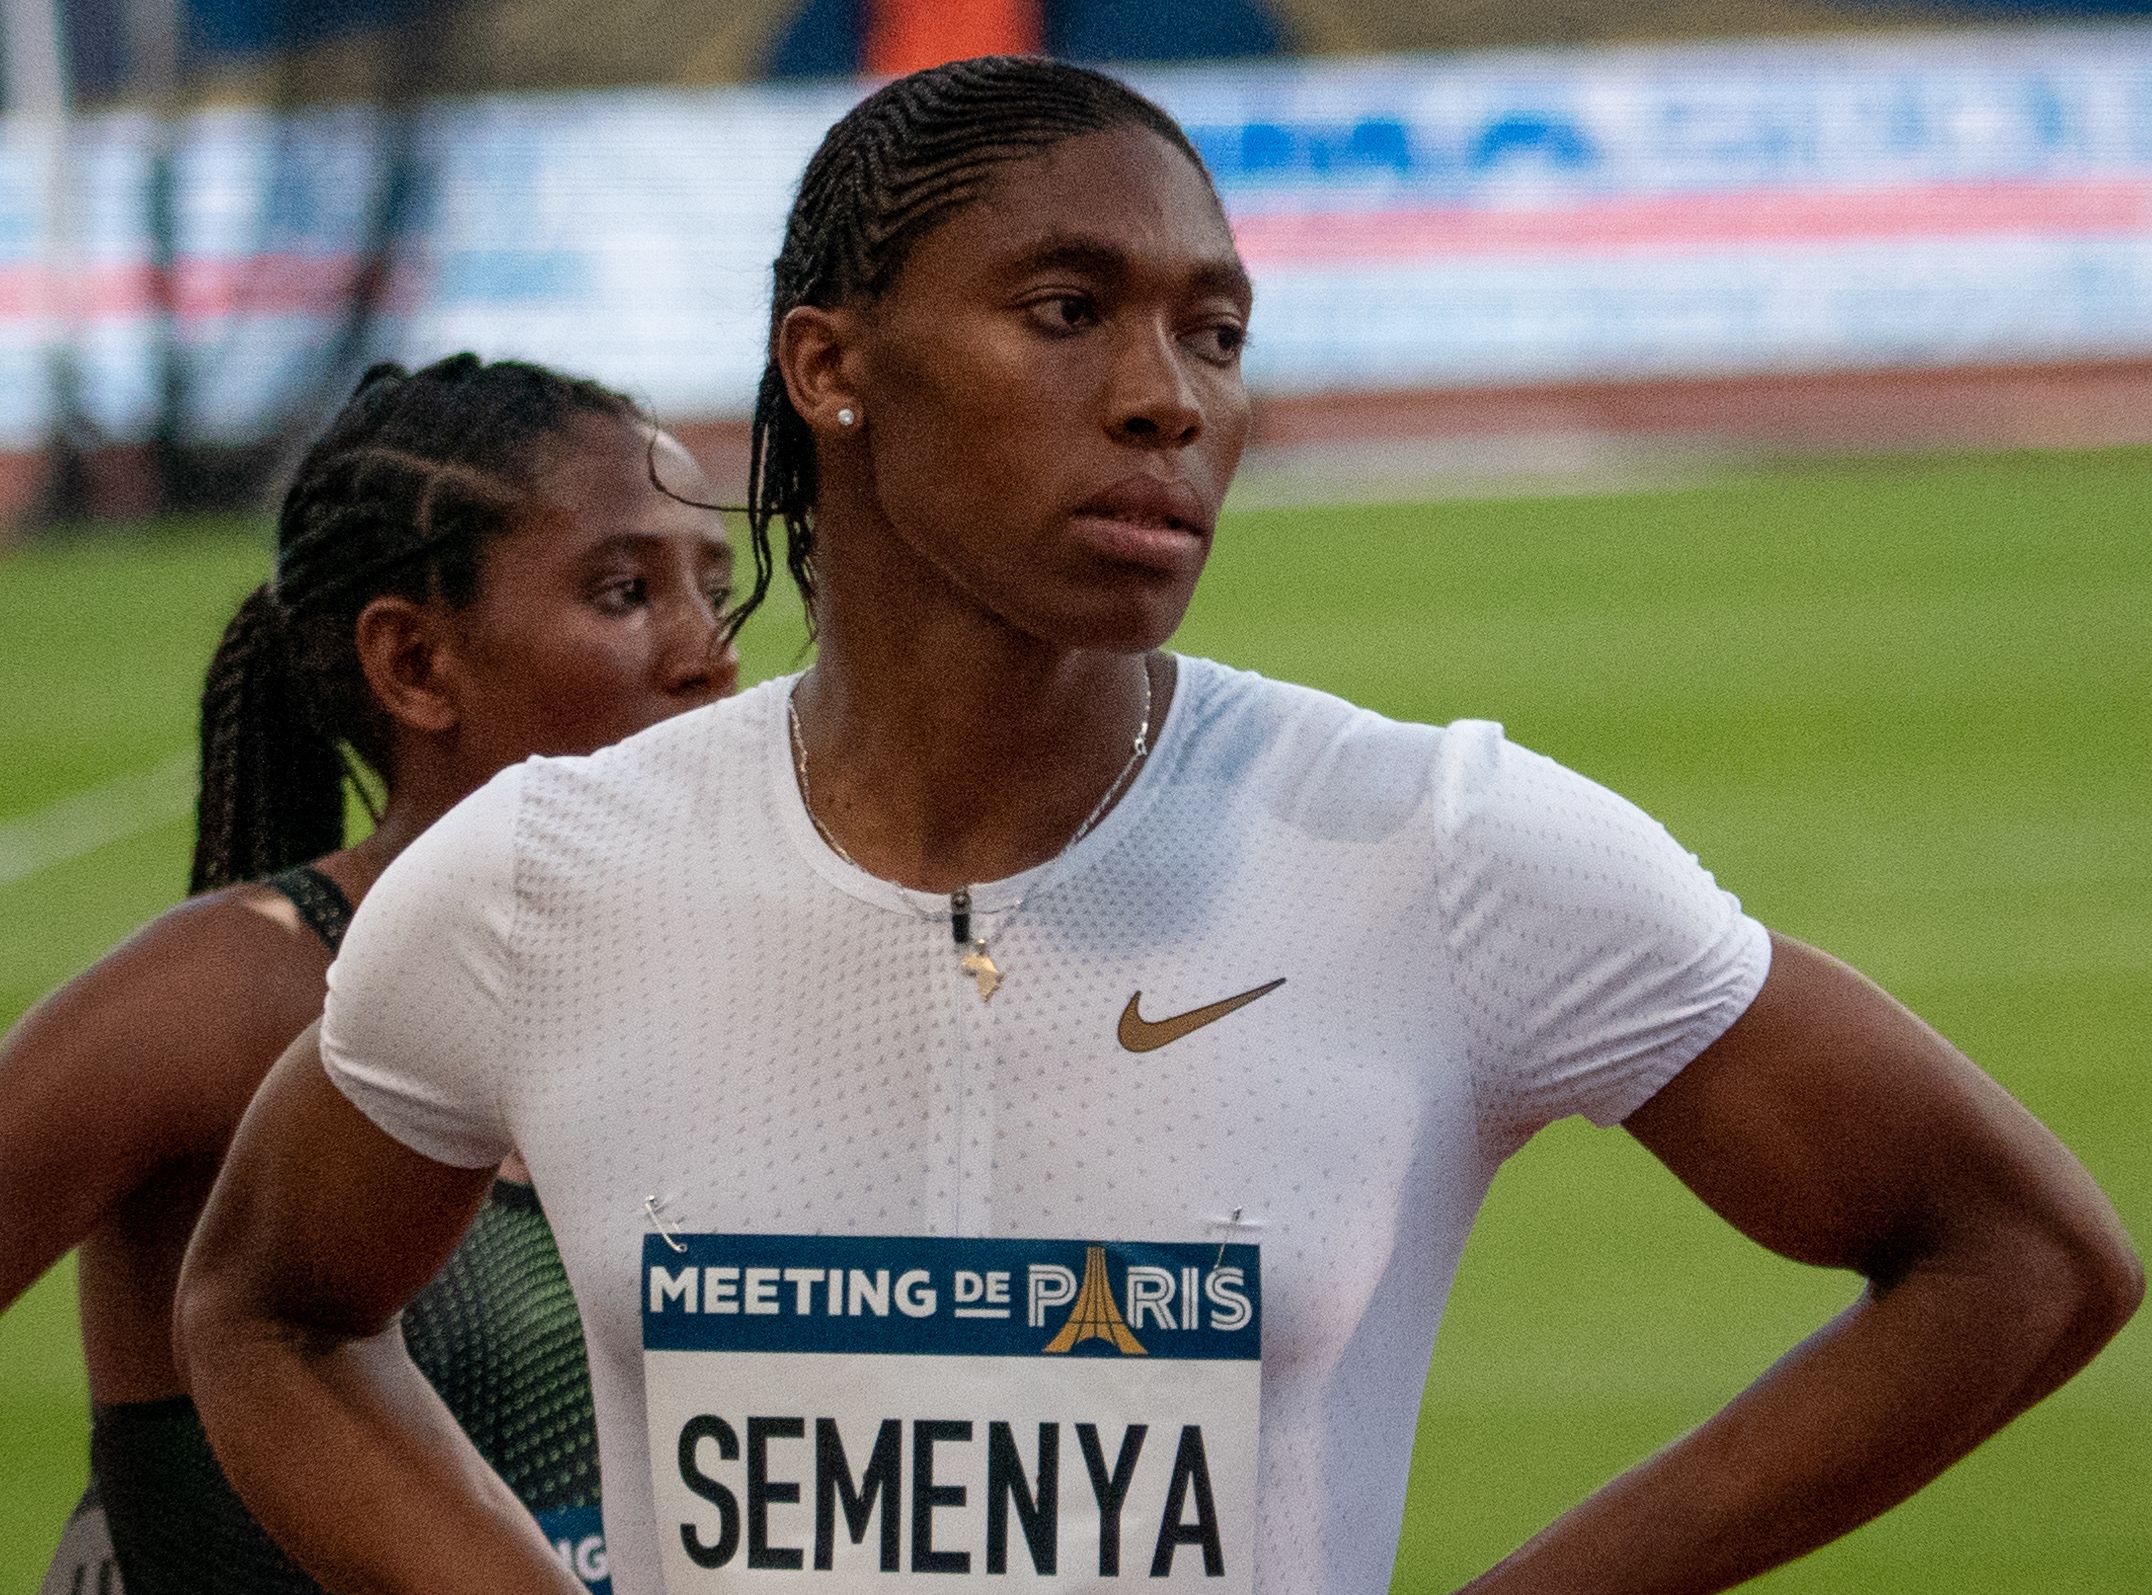 A picture of Caster Semenya after a race in Paris, standing with hands on her hips.